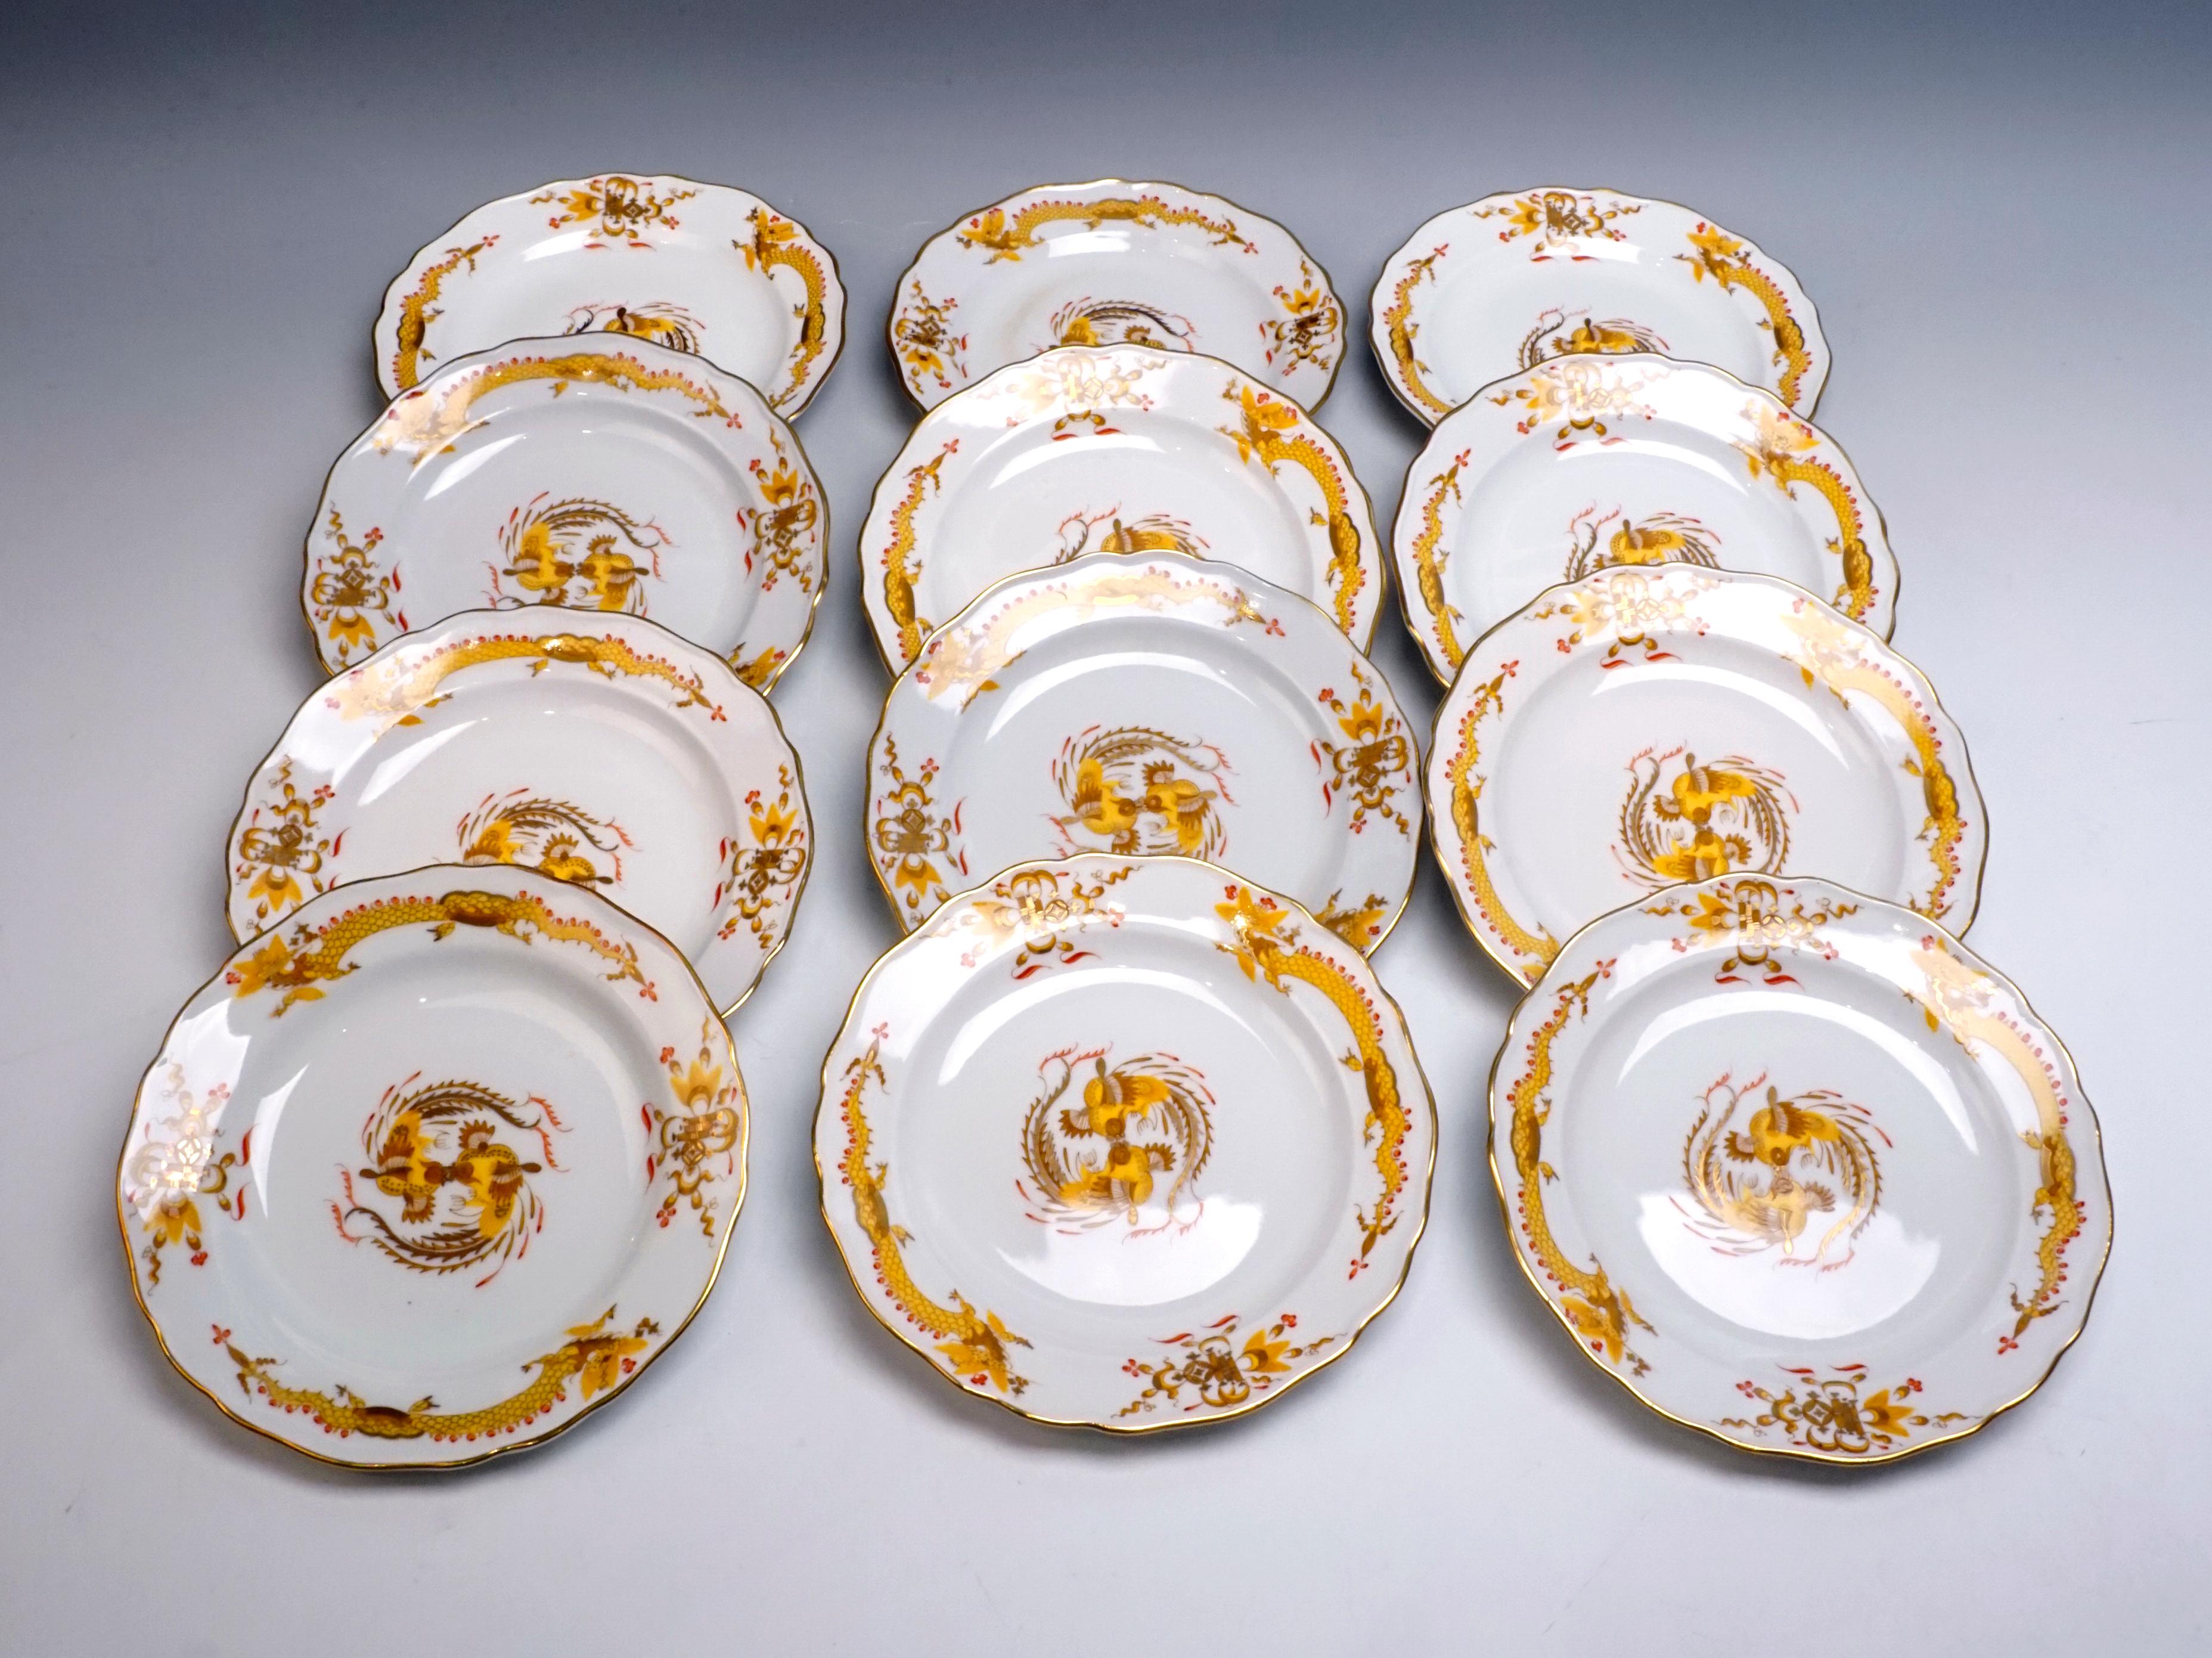 Porcelain Meissen Coffee and Tee Set with Dessert Plates 12 People Rich Dragon, Yellow